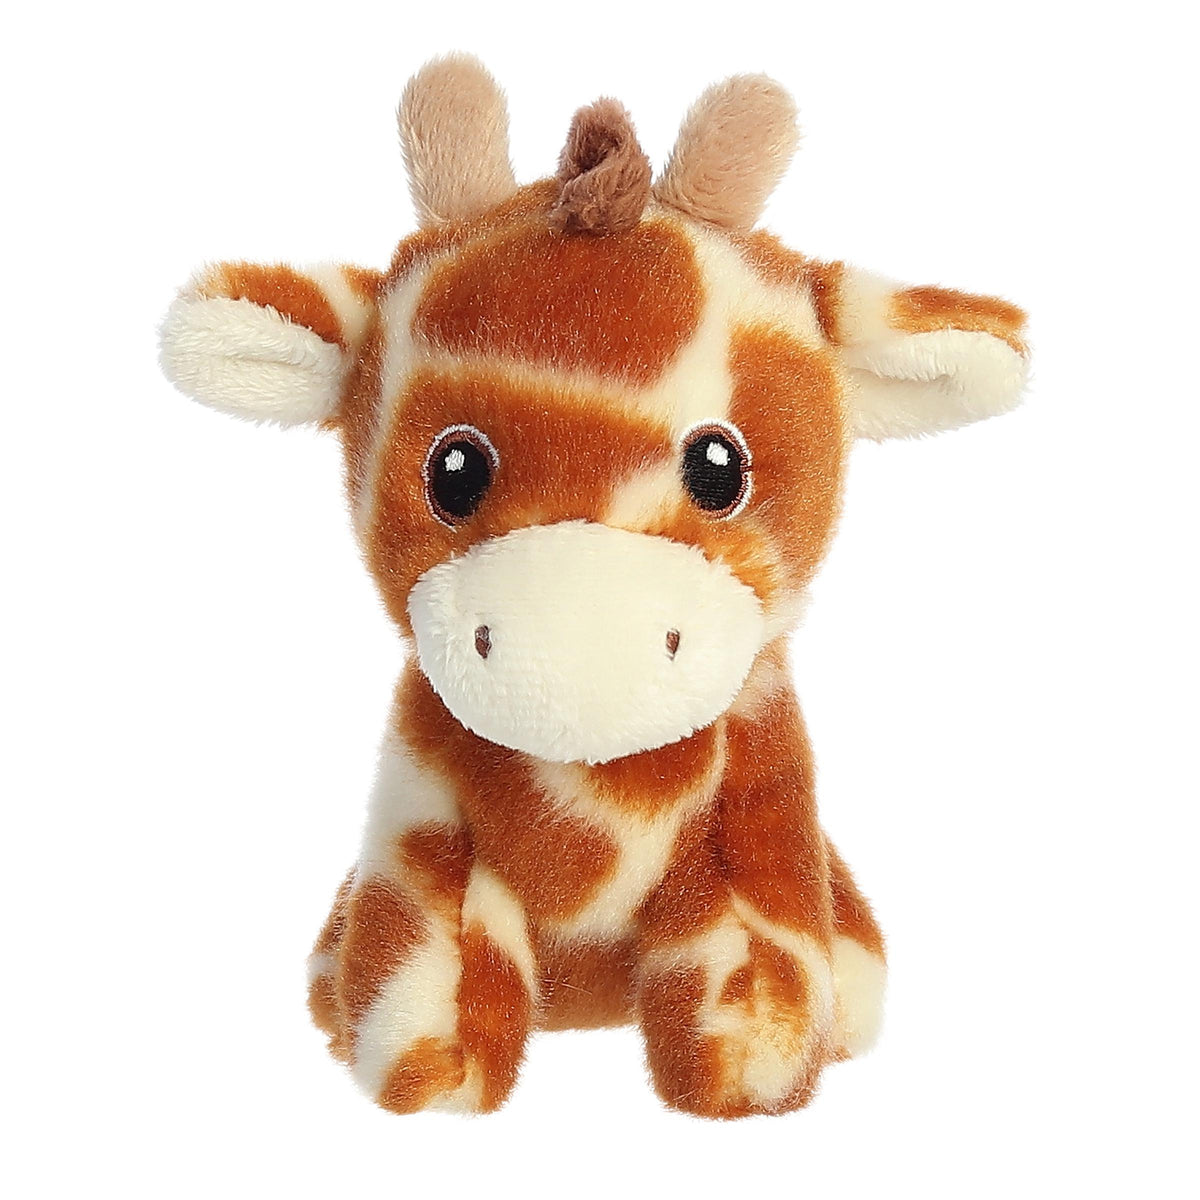 Precious mini giraffe plush with a traditional orange and tan pattern, adorable embroidered eyes, and an eco-nation tag